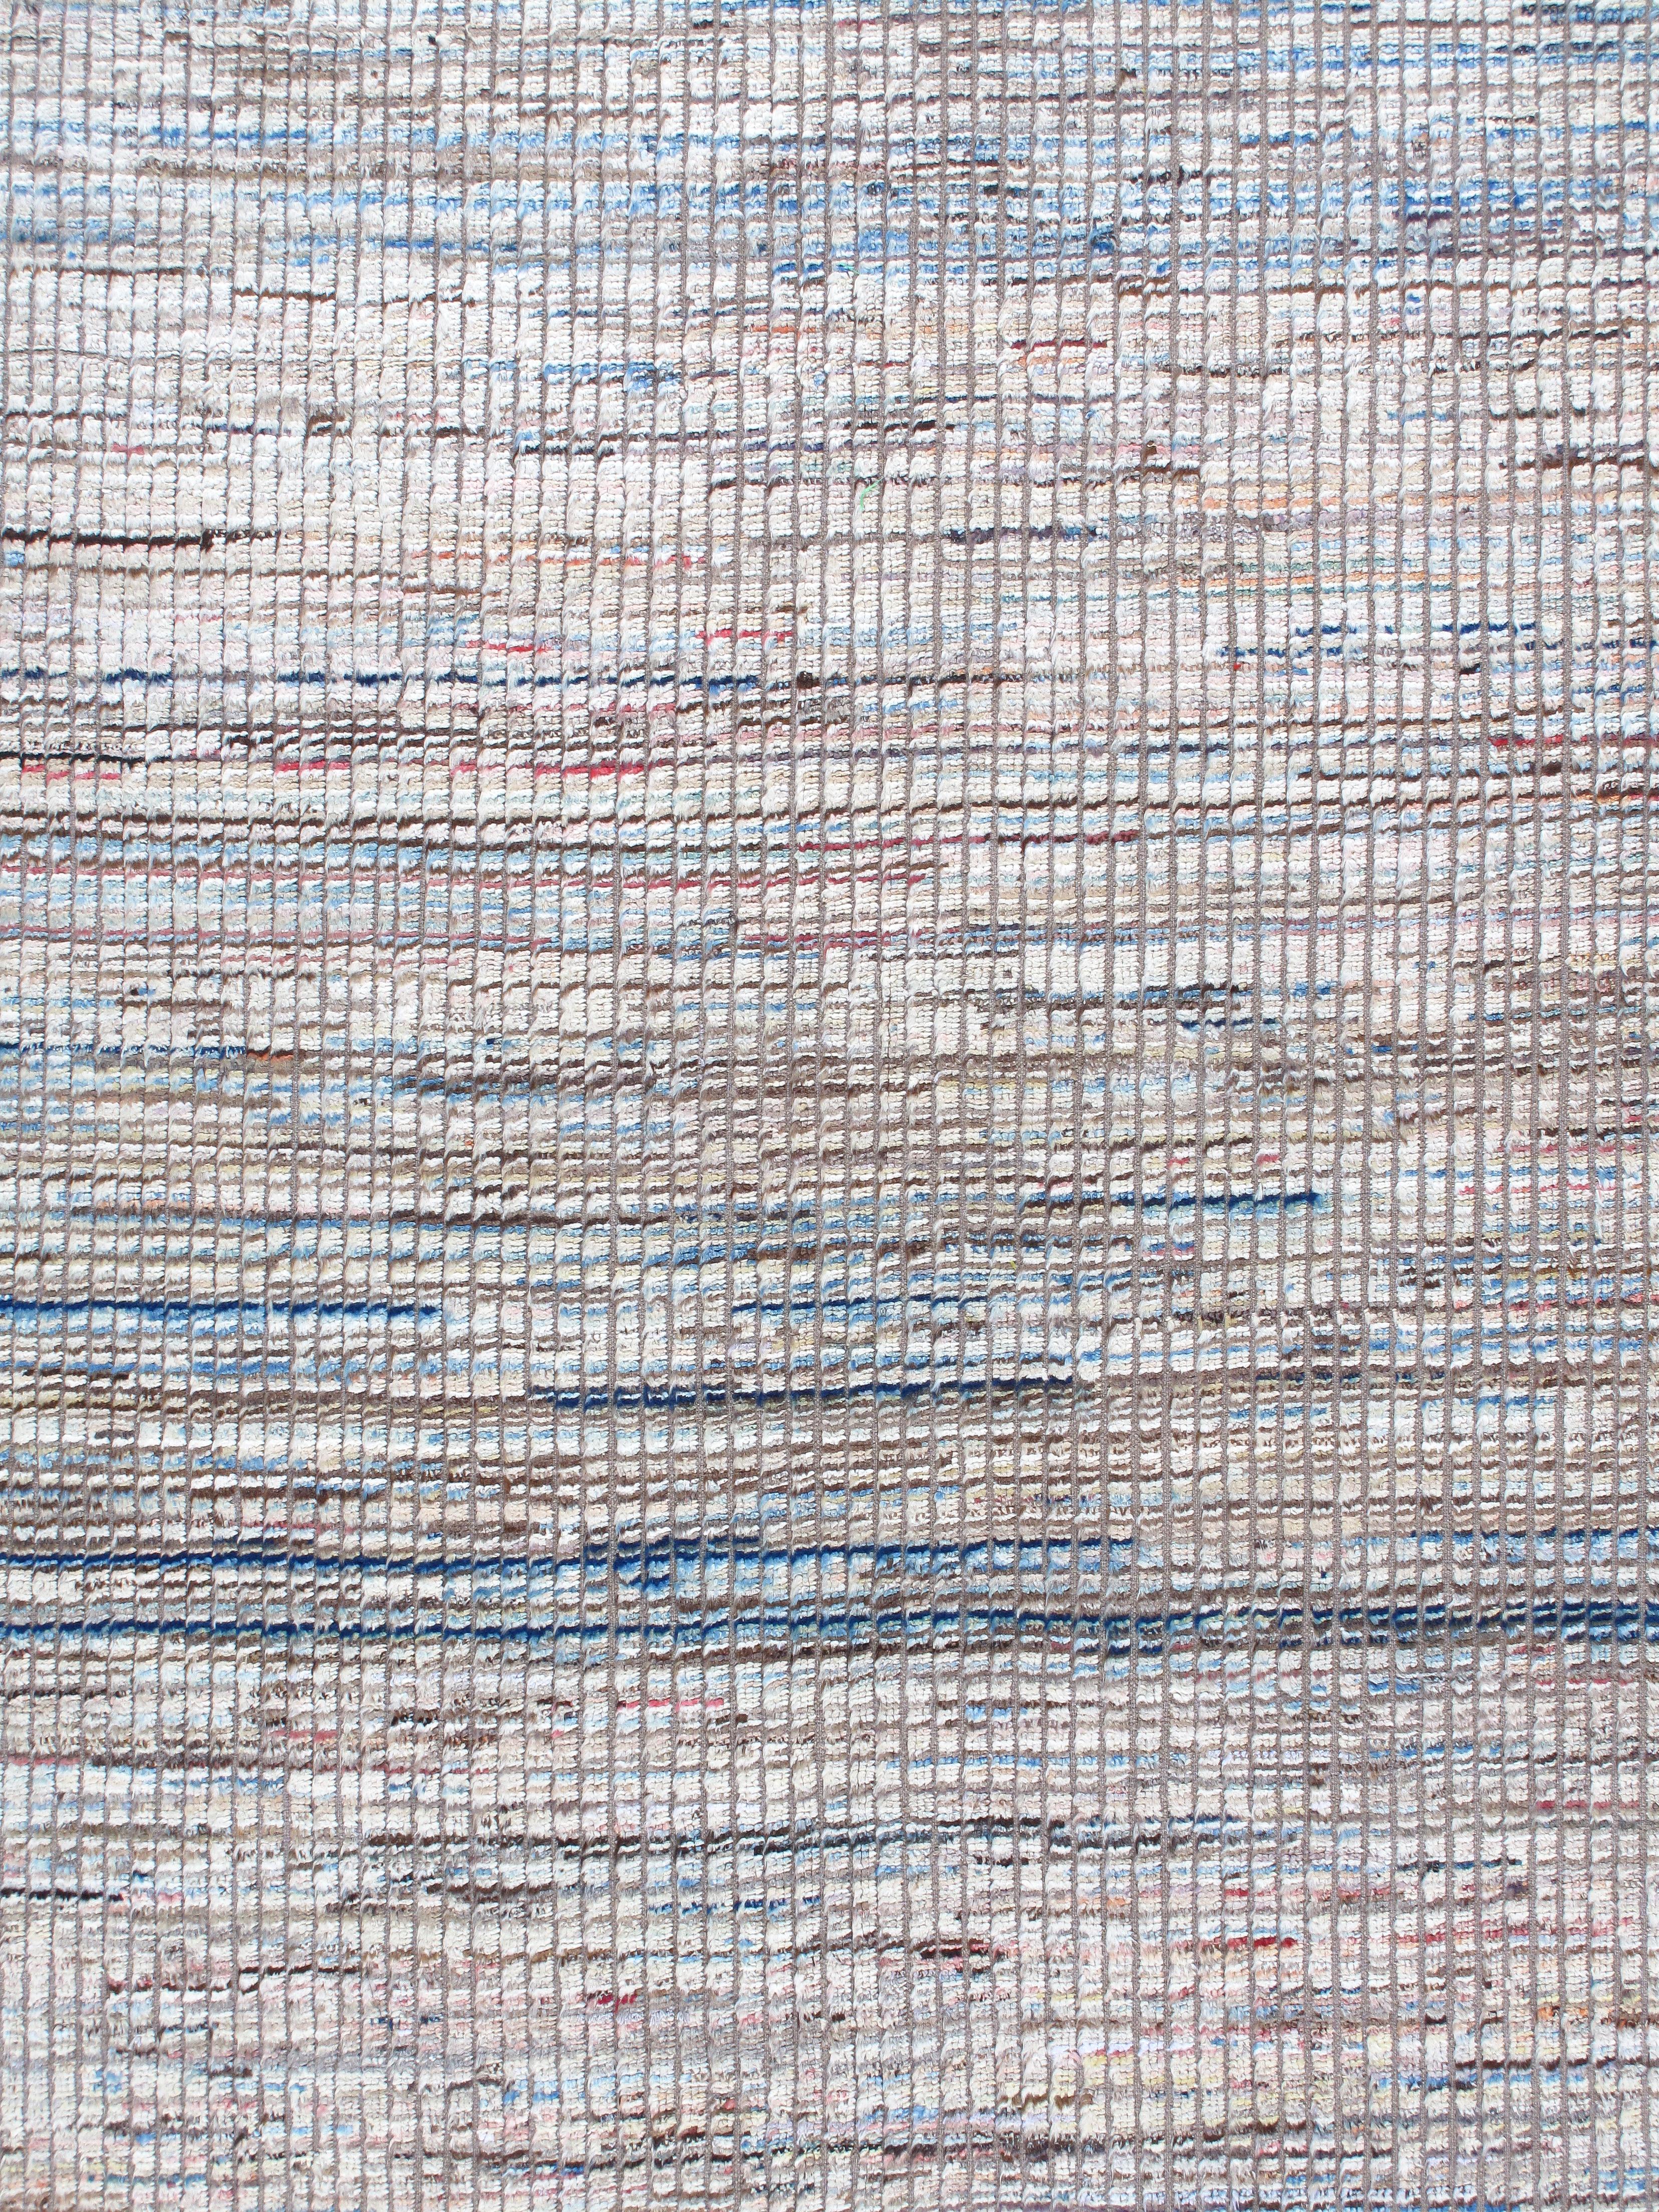 Our African rug is hand-knotted and made from the finest, hand-carded, hand-spun, naturally dyed wool. With a background of neutral tones, this rug is brought to life with its subtle notes of blues, reds and pinks. Custom sizes and colors available.